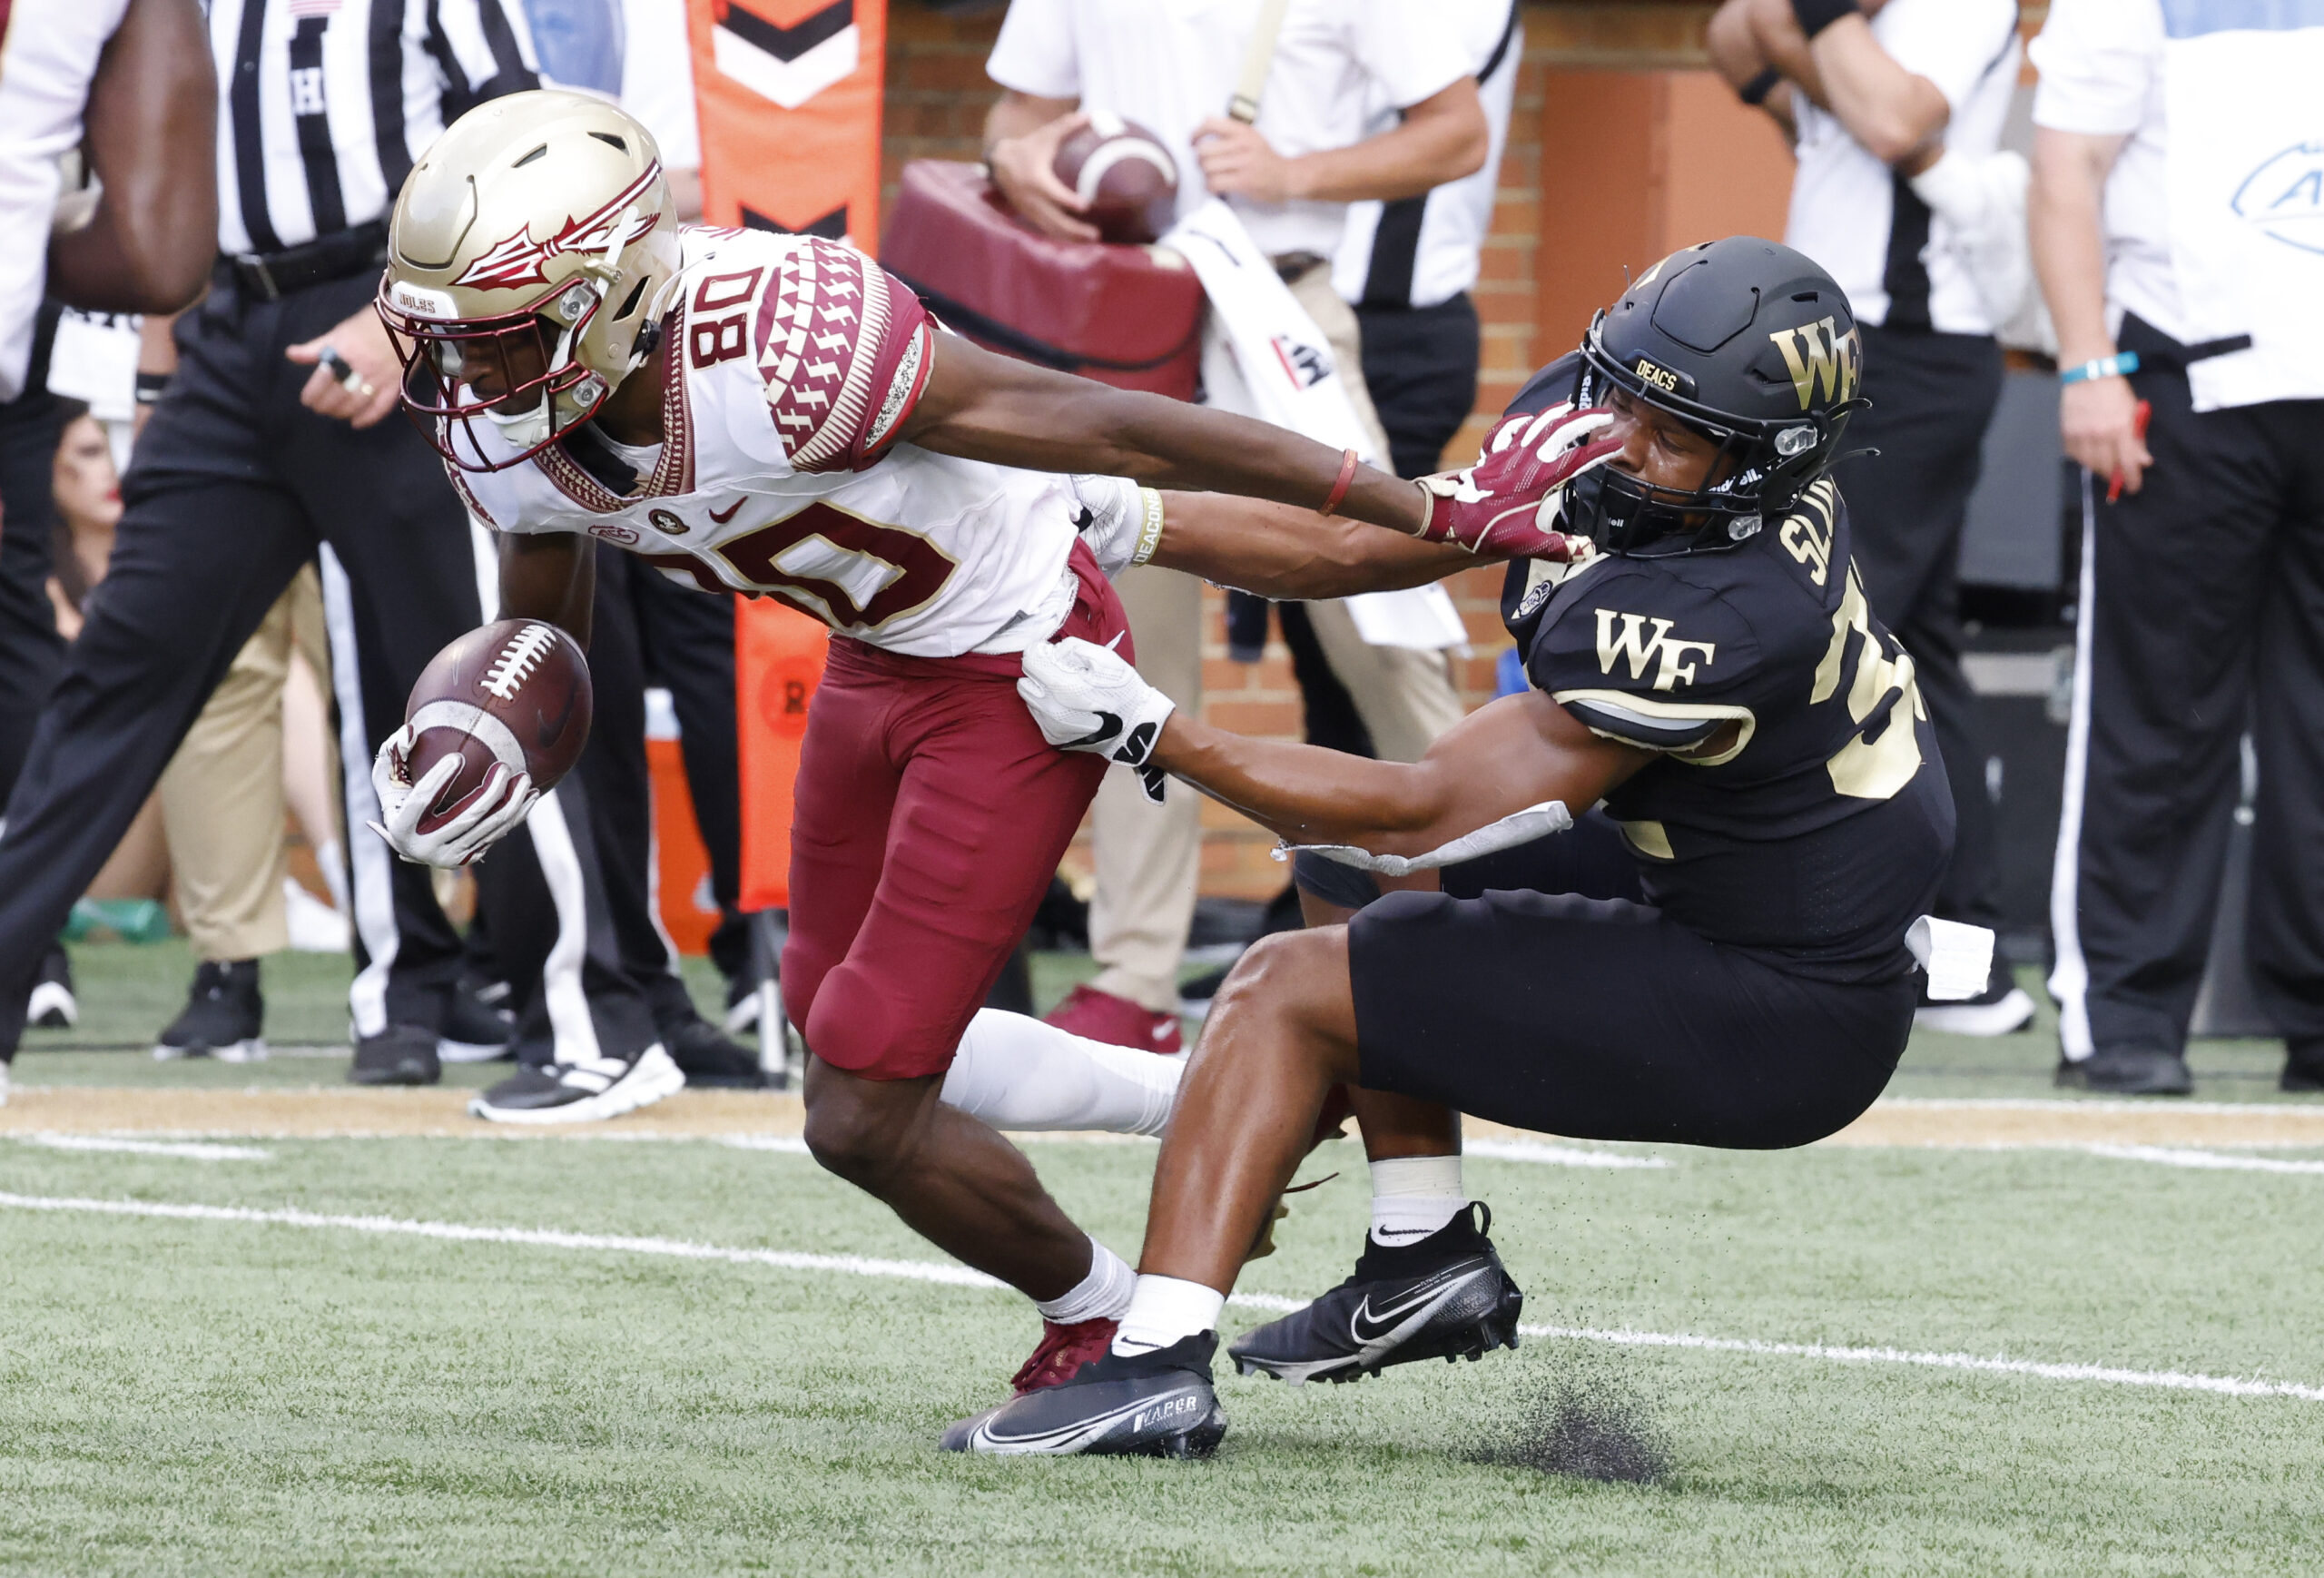 Wake Forest vs. Florida State, live stream, preview, TV channel, time, how to watch college football